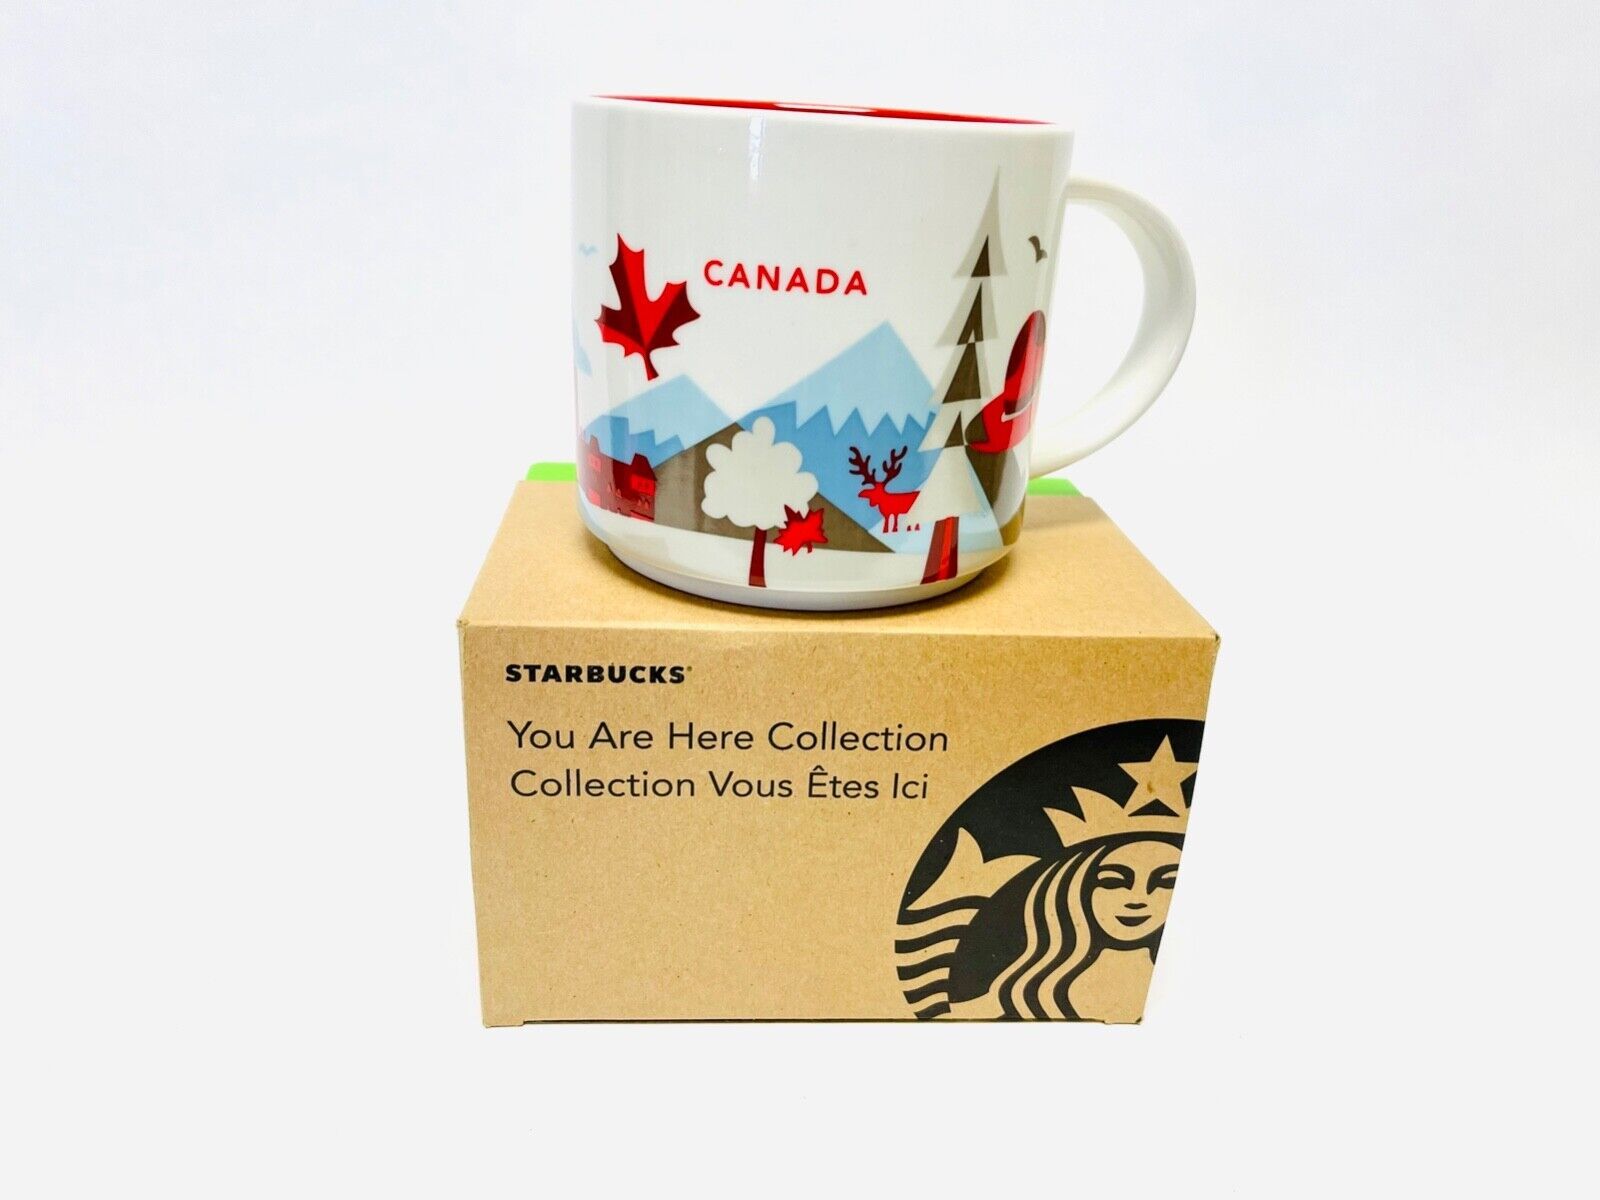 Primary image for Starbucks Canada Version 2 You are Here Coffee Global City Mug 14Oz Cup Travel